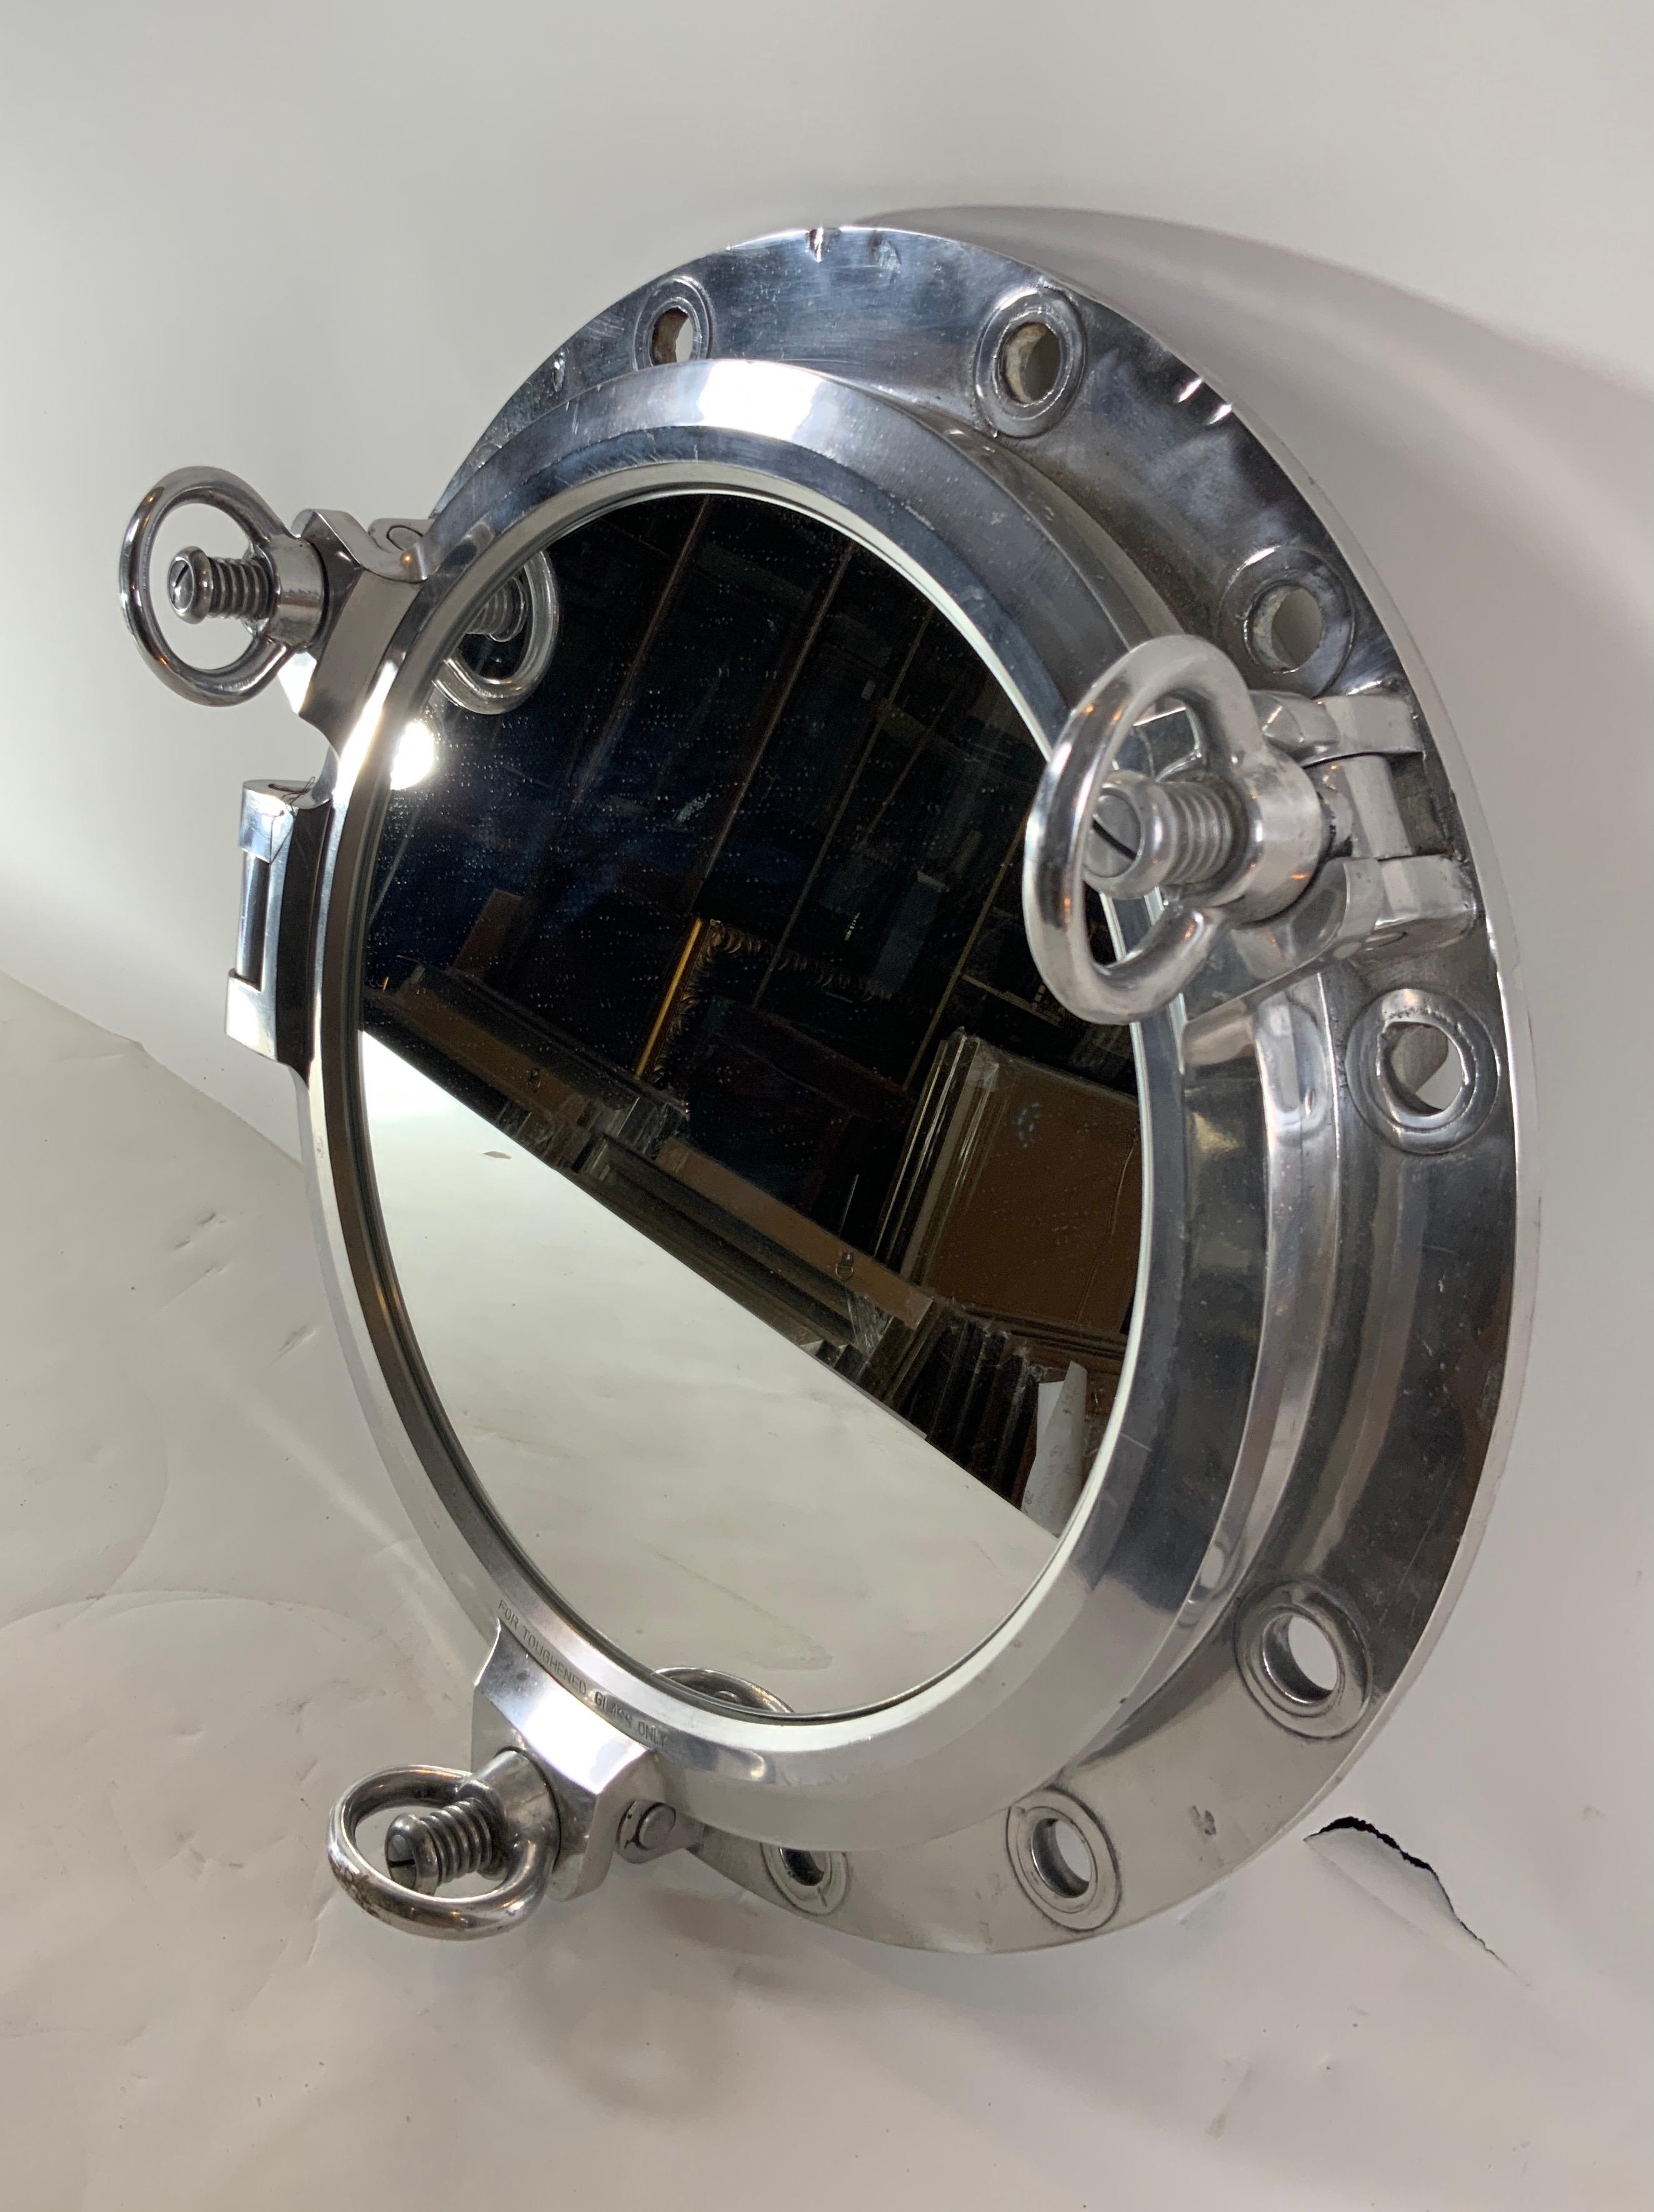 Authentic polished aluminum ship's porthole fitted with a glass window. Door is hinged and fitted with three dogbolts. The highly polished porthole is ready for display.

Overall dimensions: mirror diameter: 14